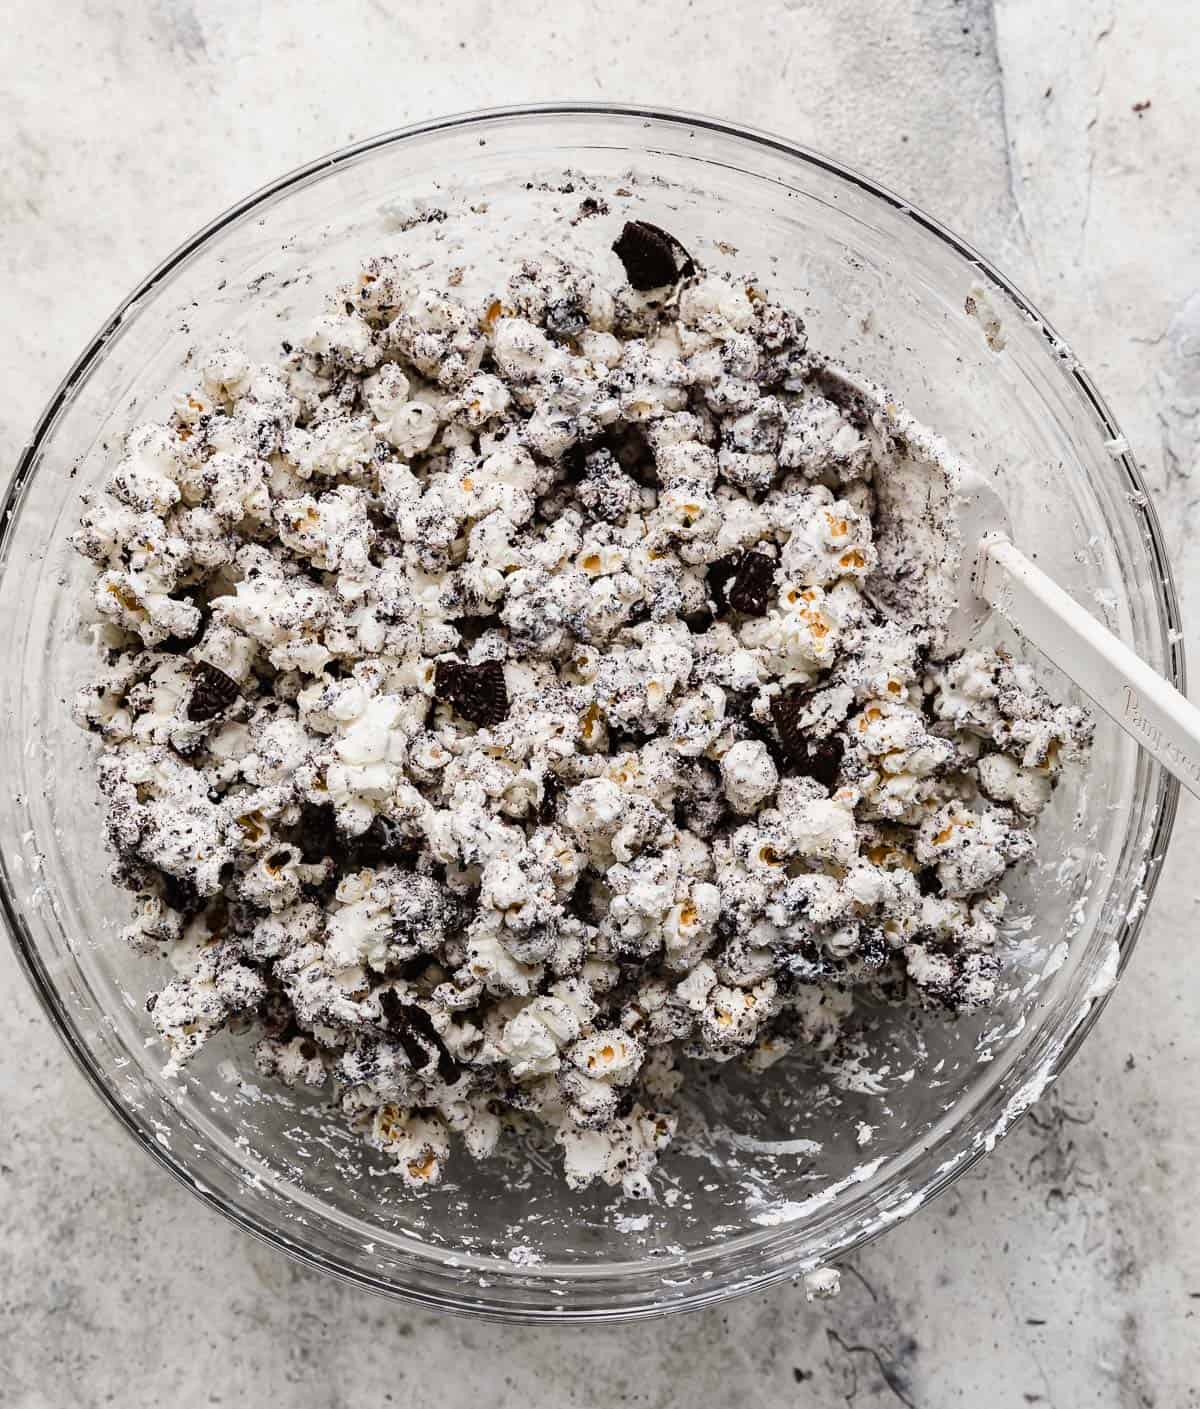 Cookies and cream, Oreo covered popcorn in a large glass bowl on a gray textured background.